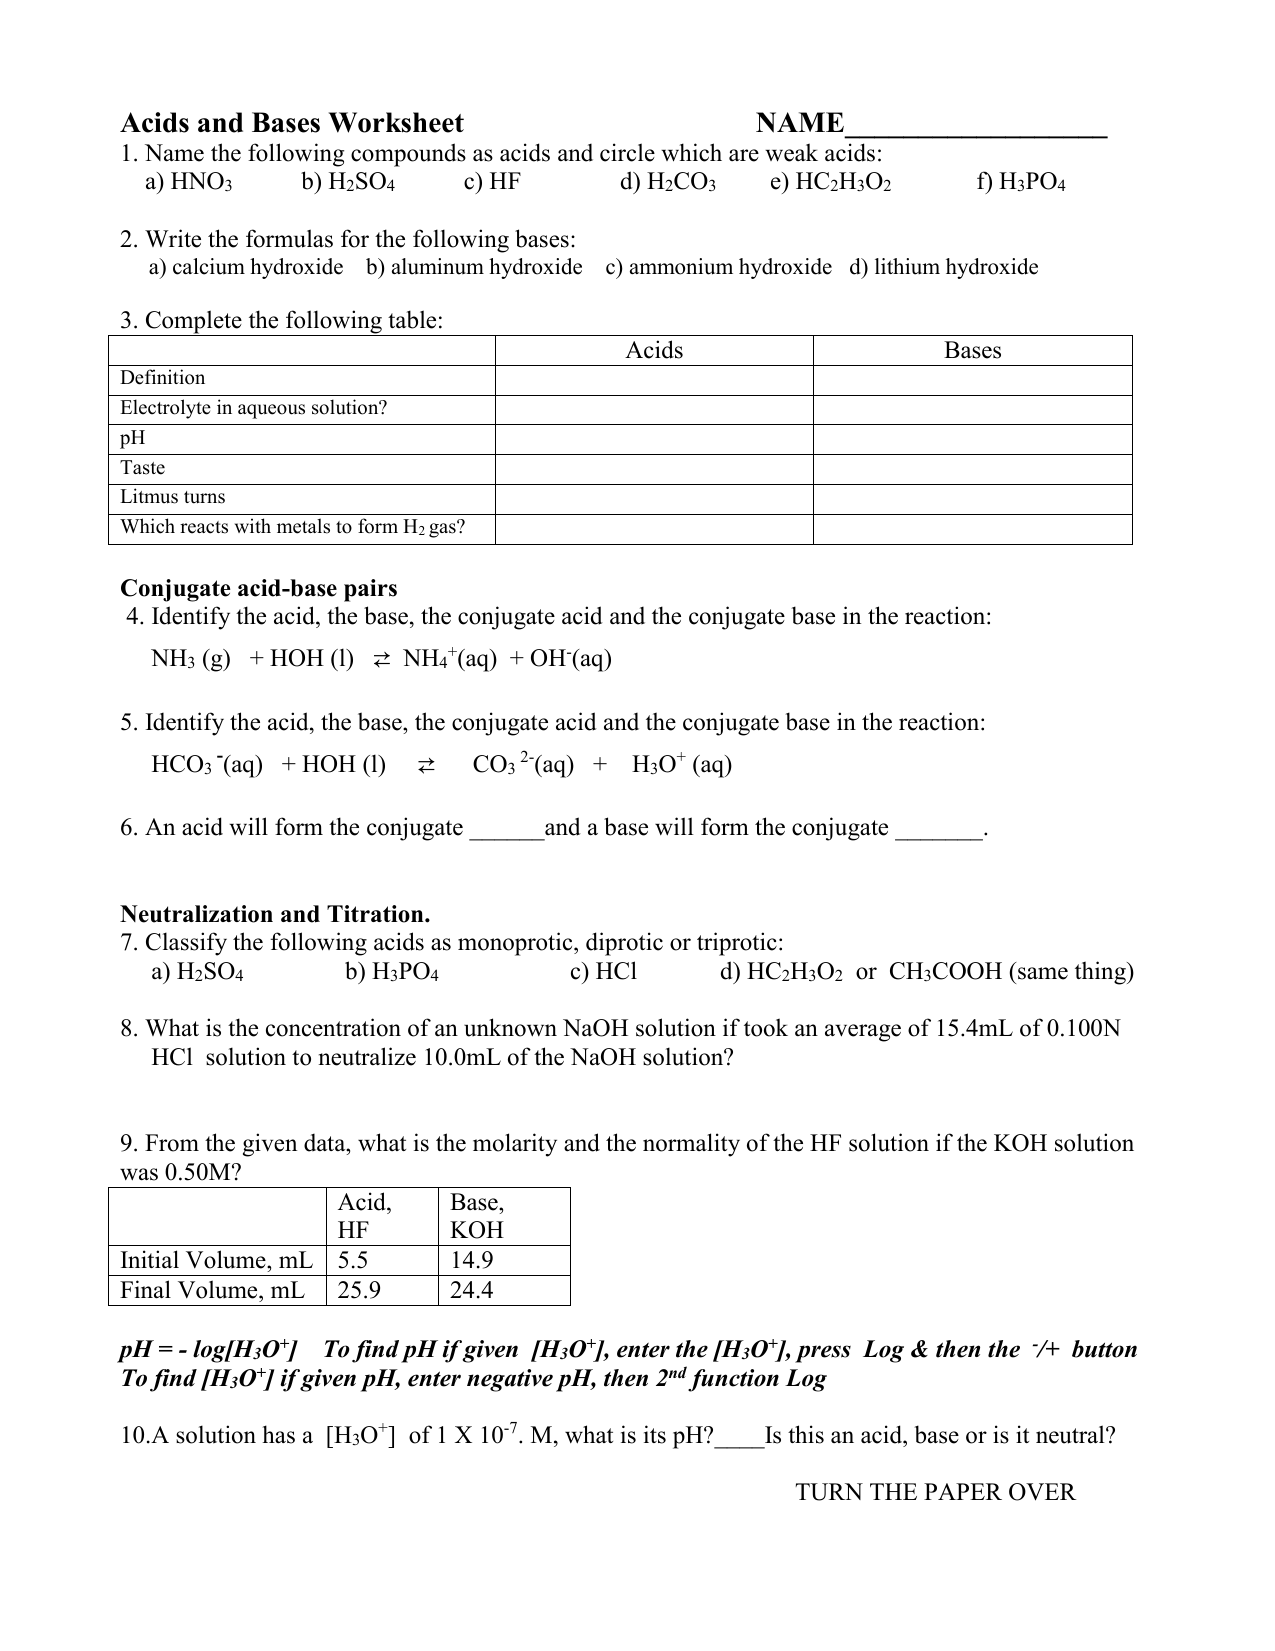 Acids and Bases Worksheet With Acids And Bases Worksheet